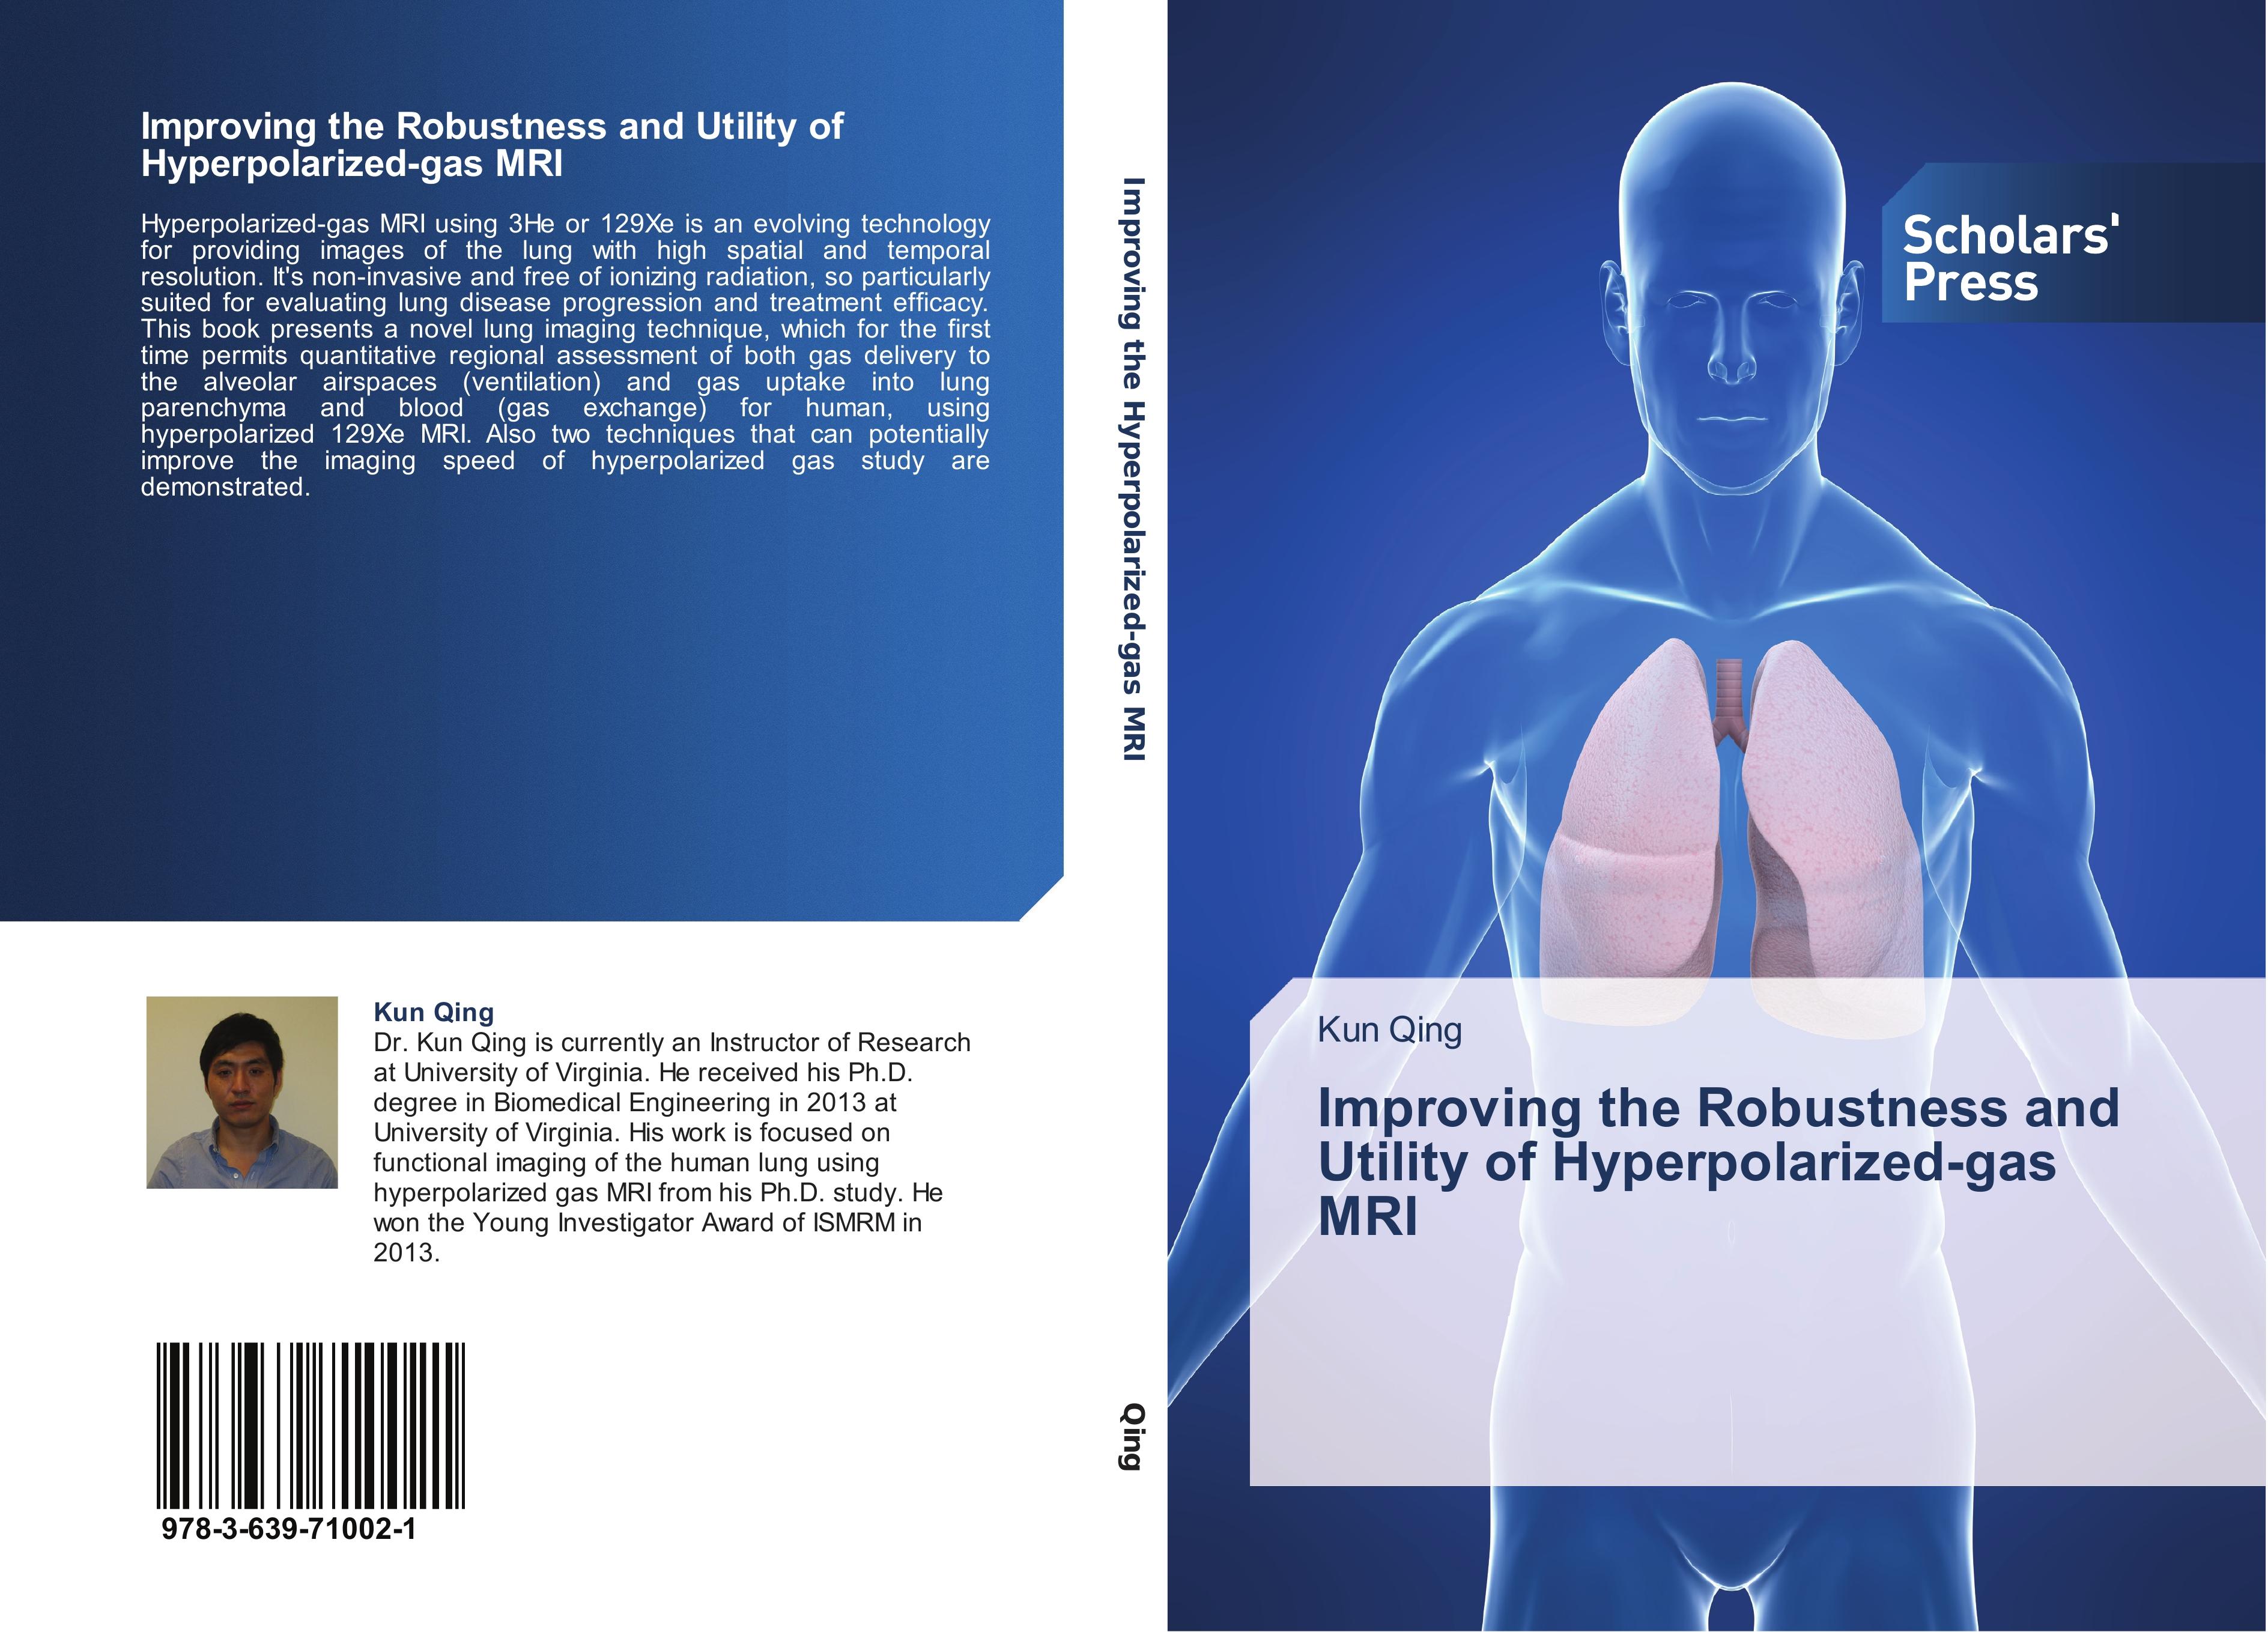 Improving the Robustness and Utility of Hyperpolarized-gas MRI | Kun Qing | Taschenbuch | Paperback | 160 S. | Englisch | 2014 | Scholars' Press | EAN 9783639710021 - Qing, Kun